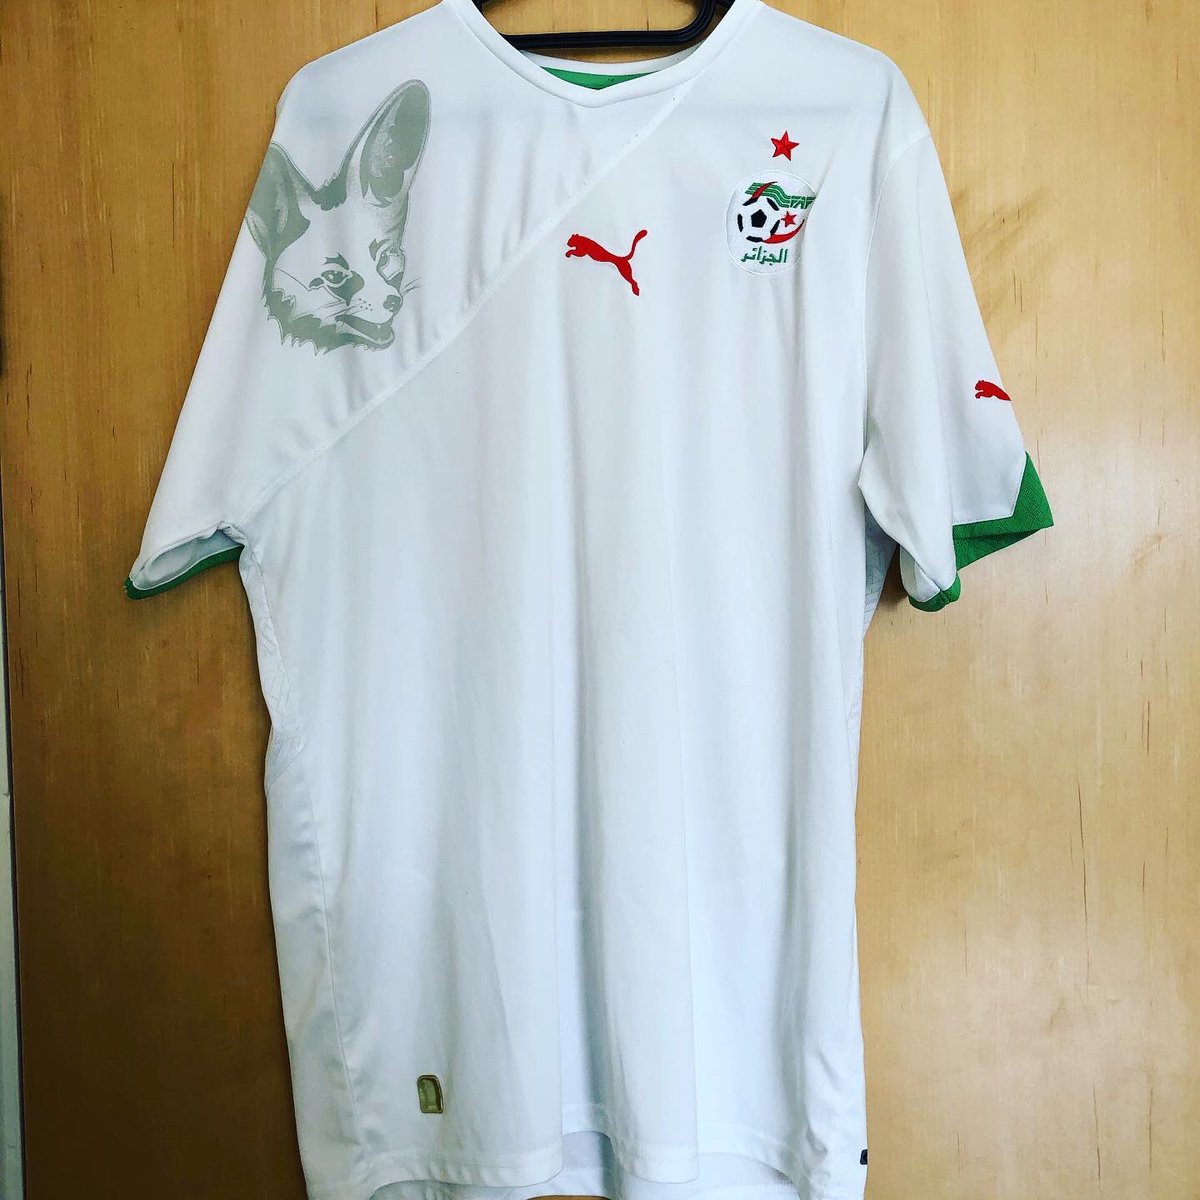 . @LesVerts Home Kit, 2010 @PUMAI’m a huge fan of shirts featuring a country’s national animal. I have a few of those.That was a feature of Puma’s shirts for the 2010 African Cup of Nations, as well as a “Kinte” pattern in the back. Algeria’s kit featured the Fennec Fox.